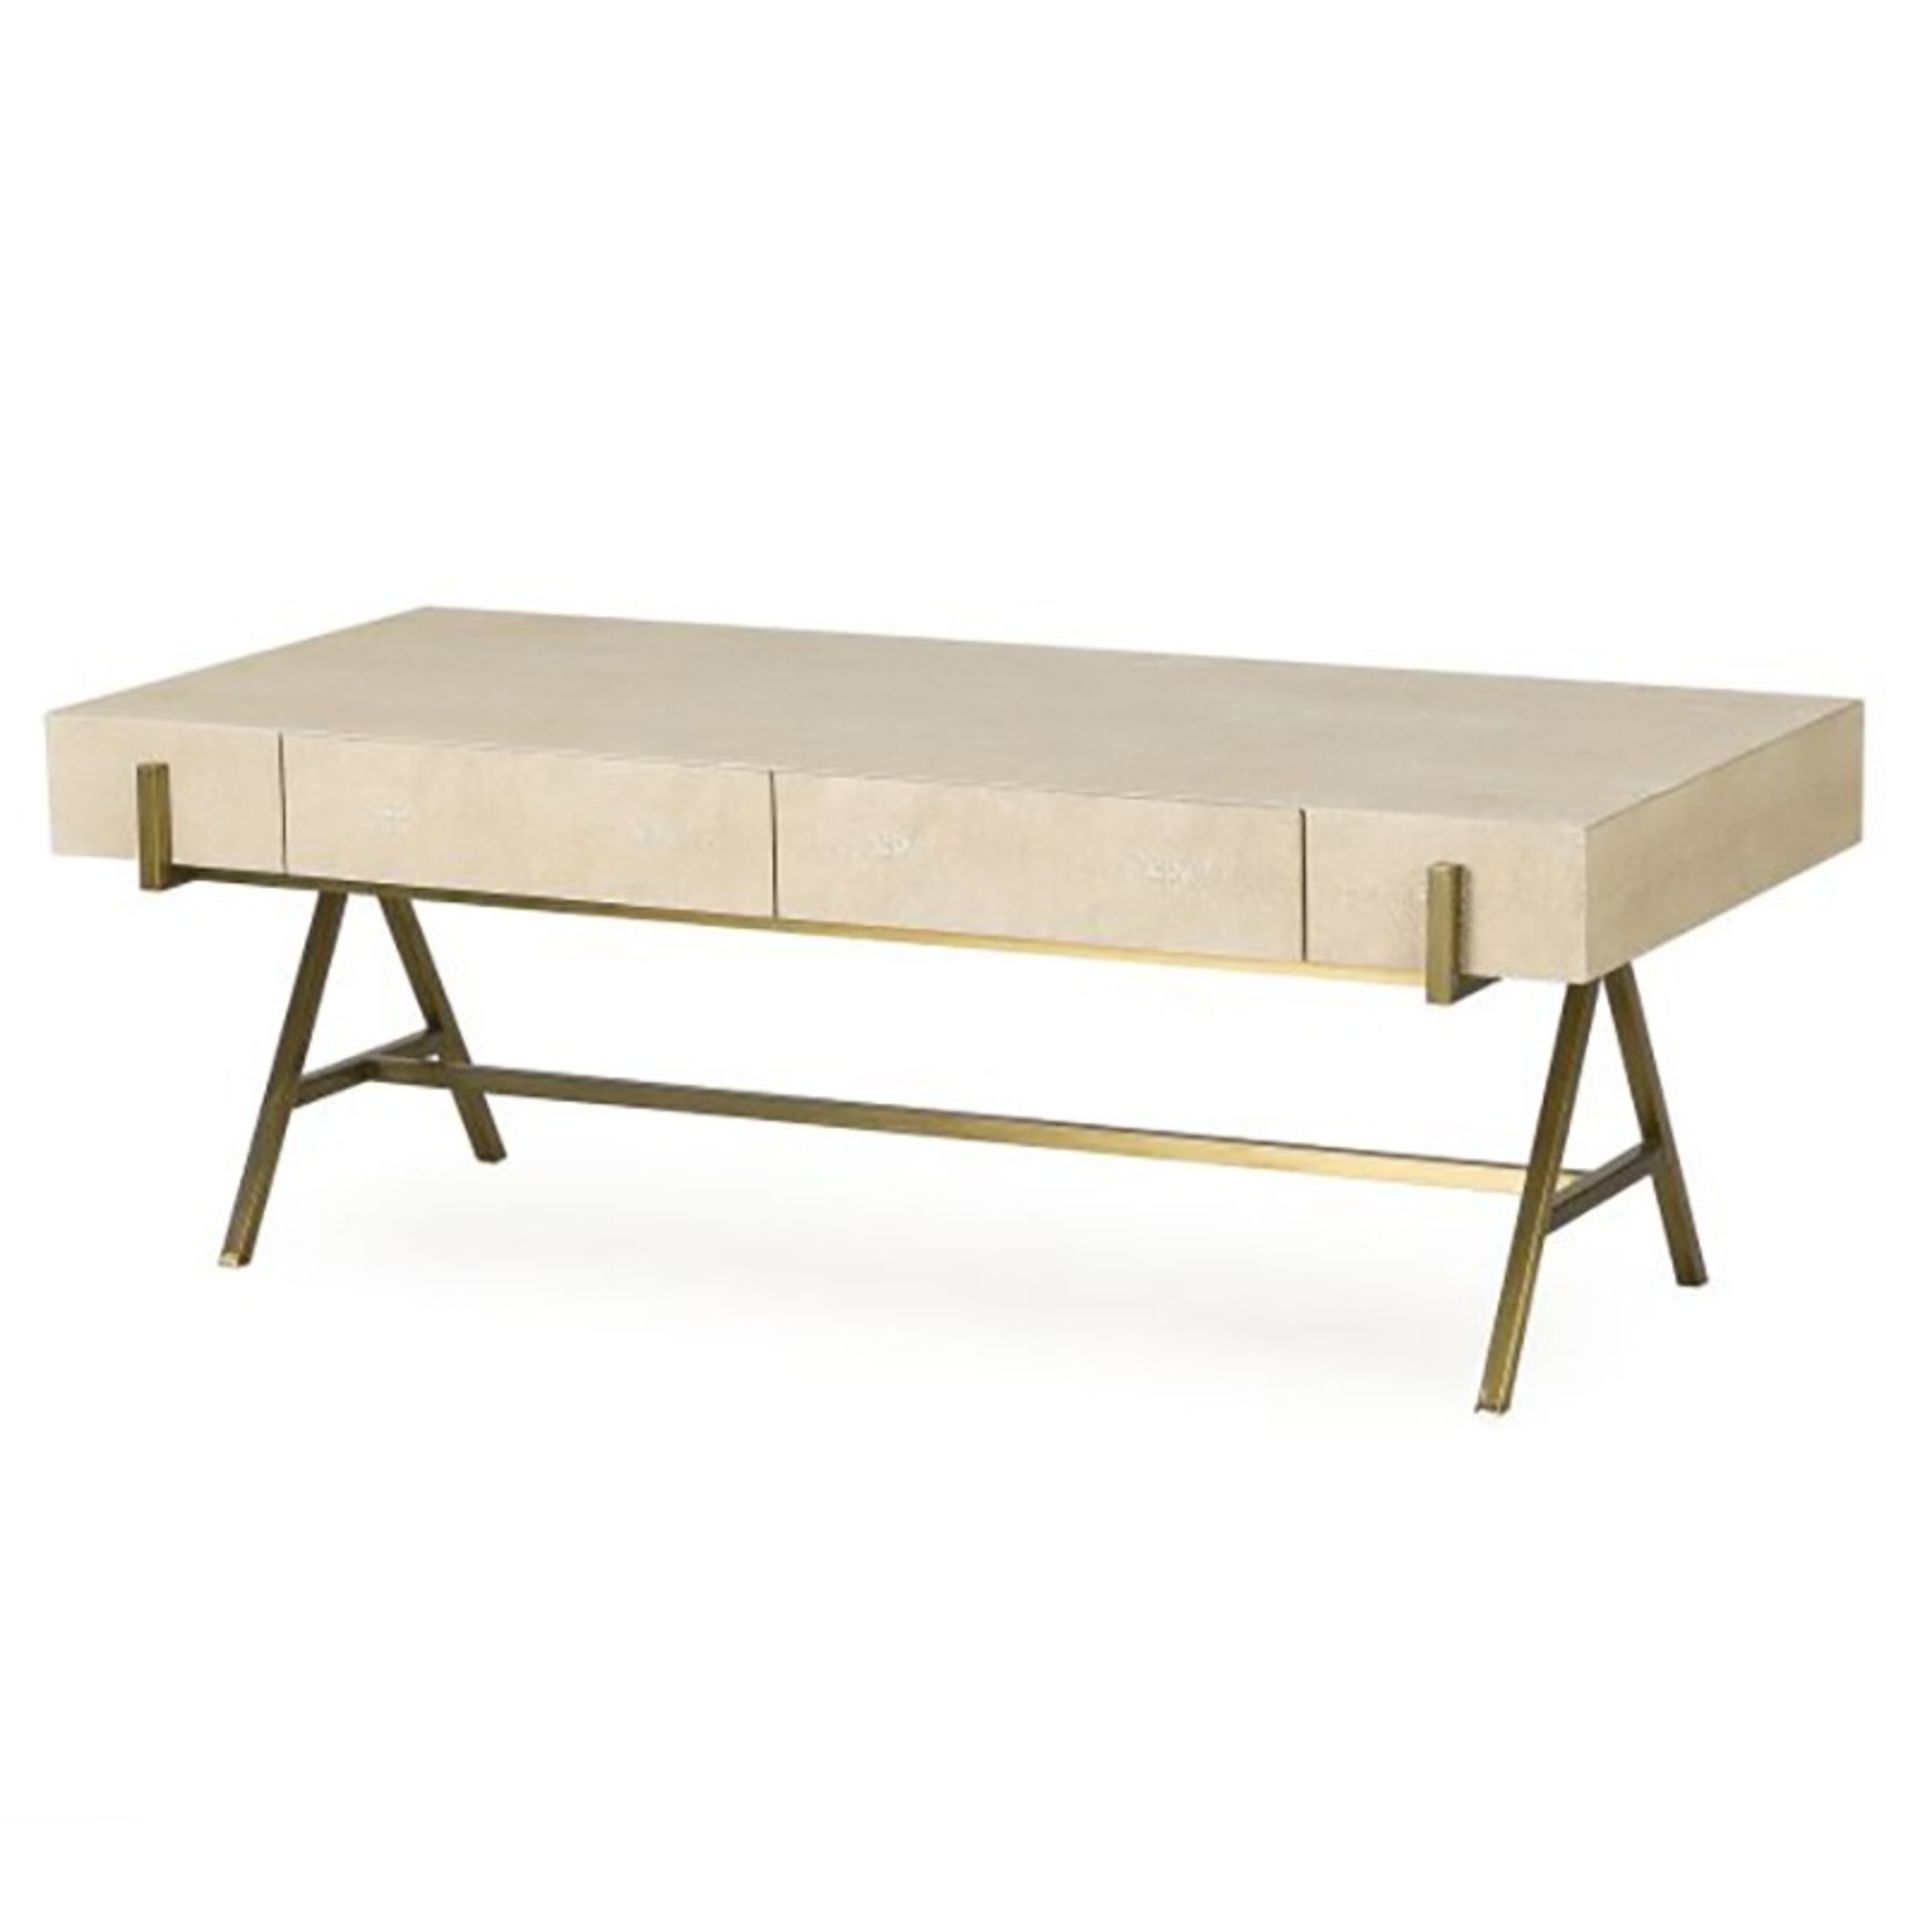 Delilah Coffee Table- Cream Shagreen Coffee Table With Satin Brass Base With Two Drawers Gorgeous